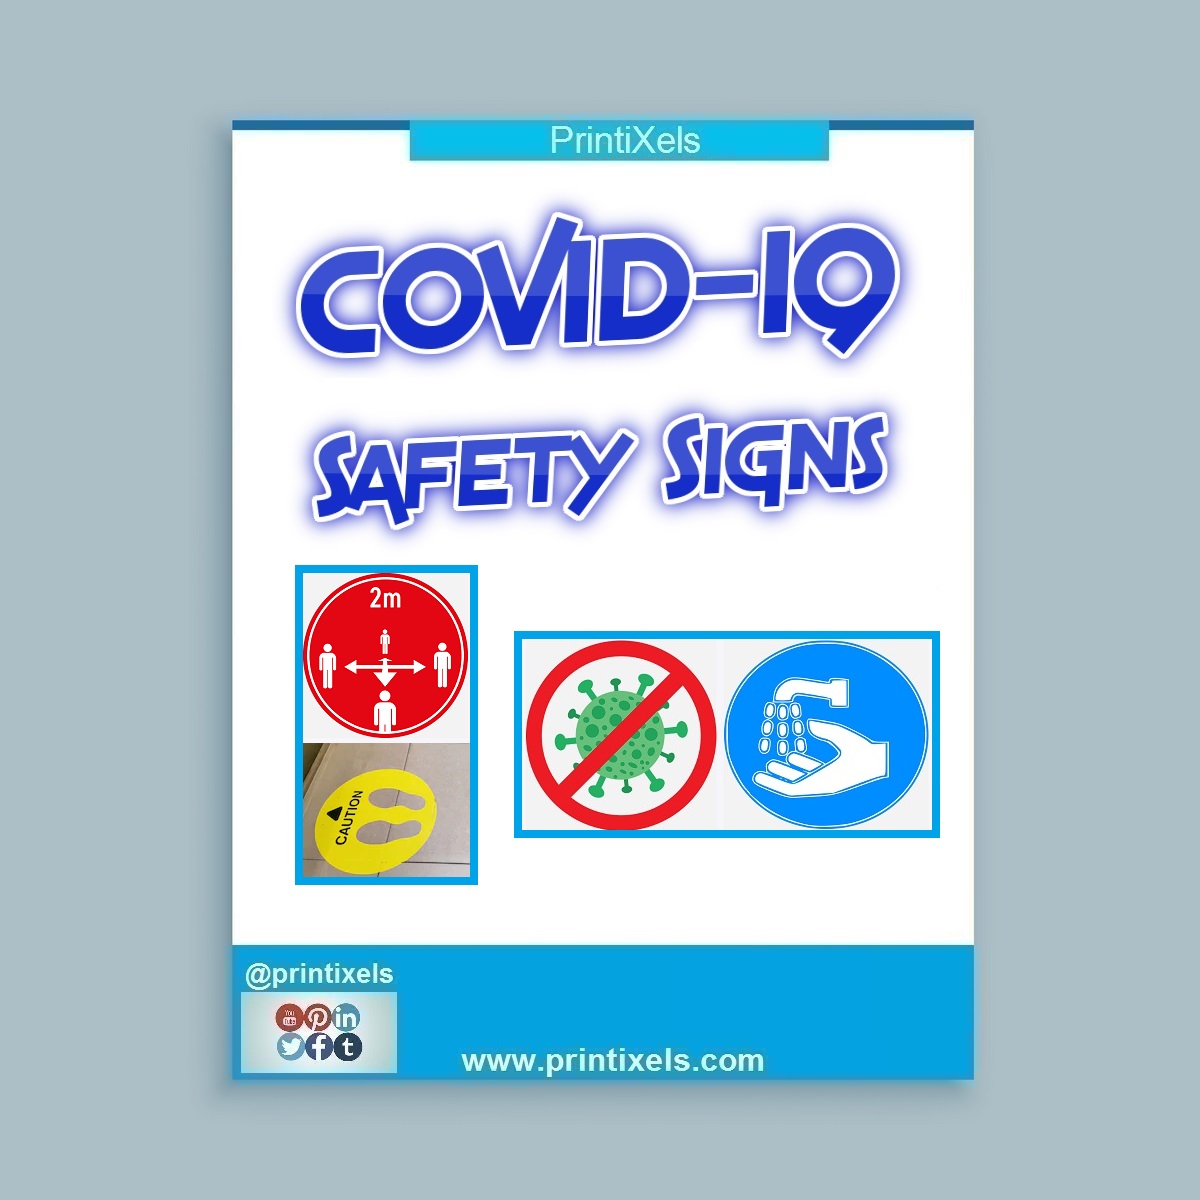 COVID-19 Safety Signs Philippines